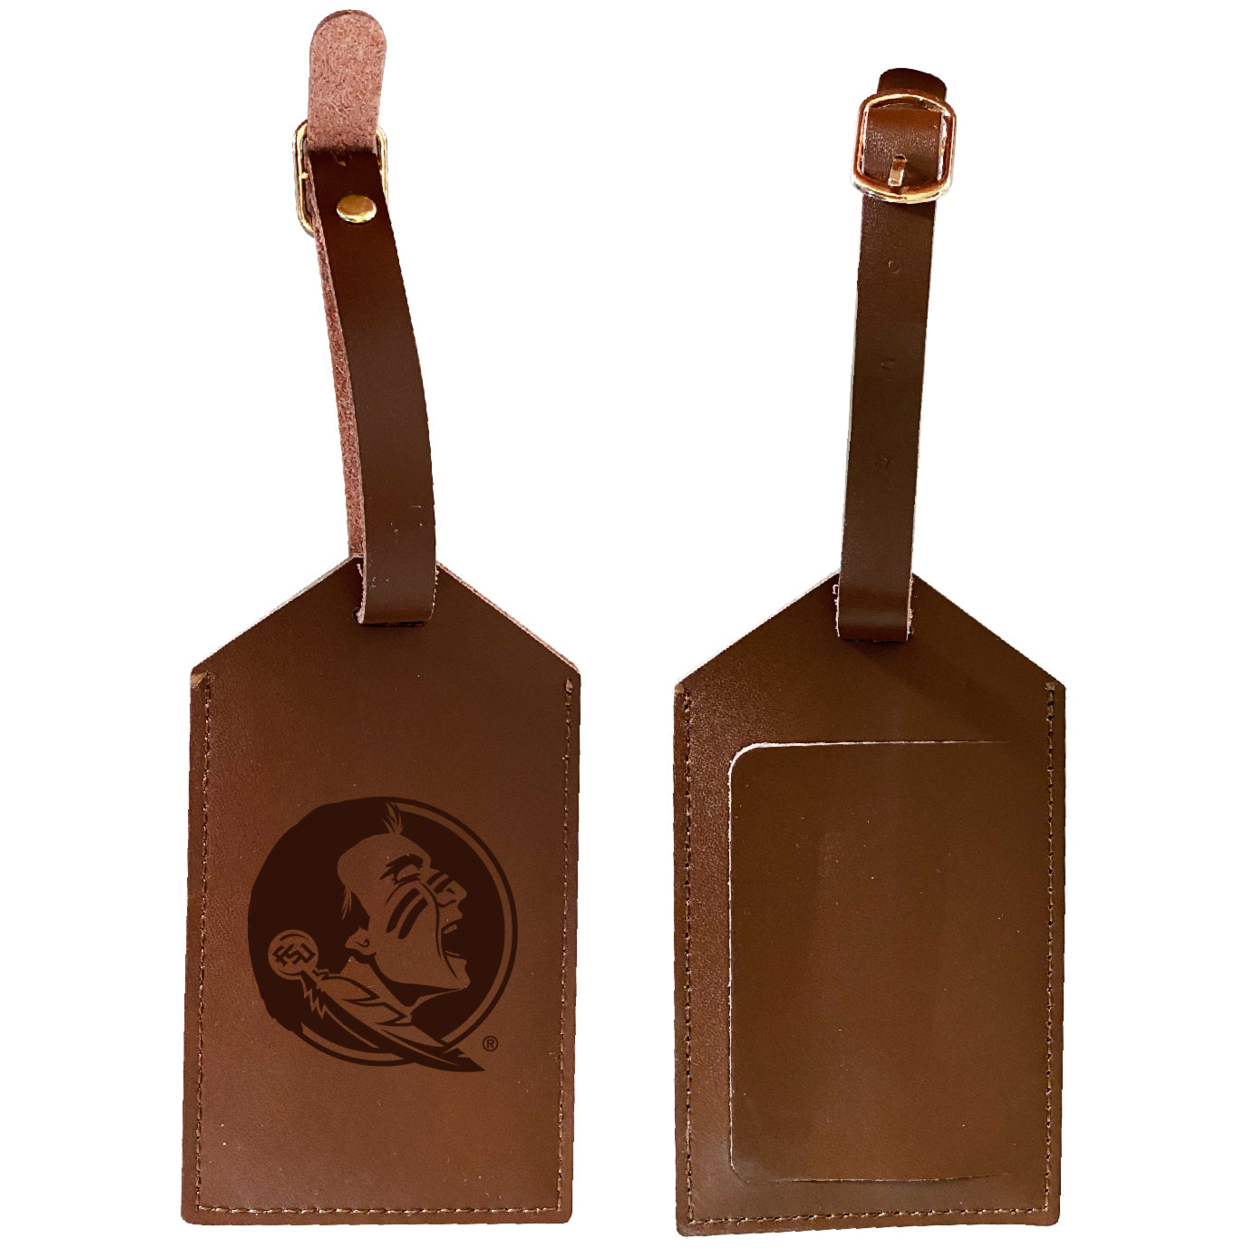 Florida State Seminoles Leather Luggage Tag Engraved